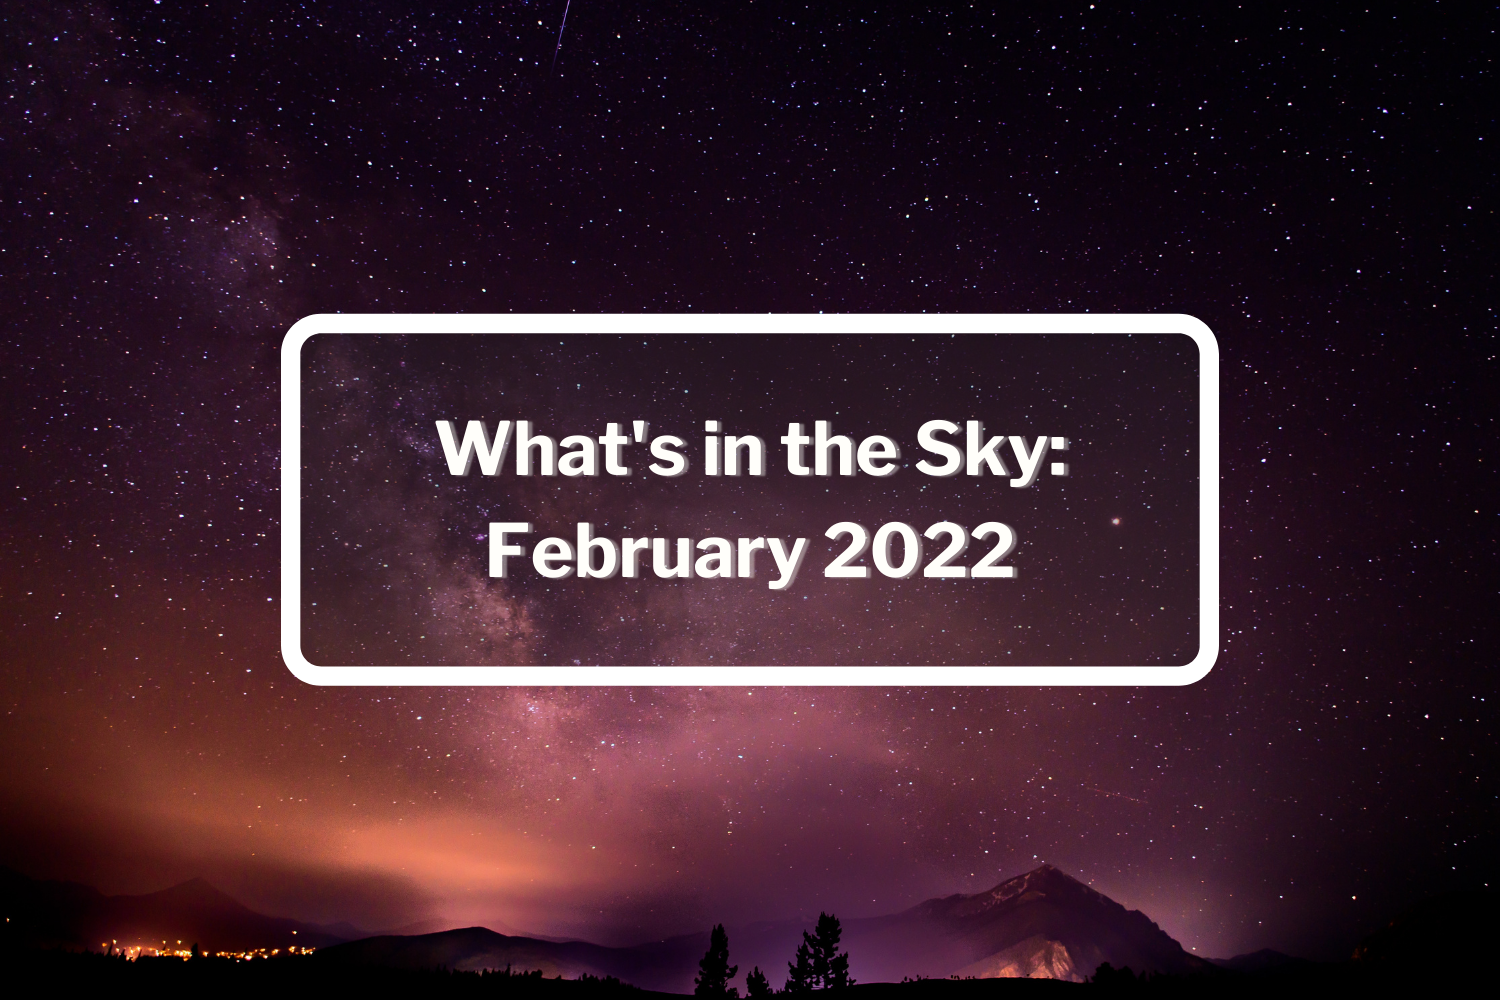 What's in the Sky? Top Astronomy Events of February 2022